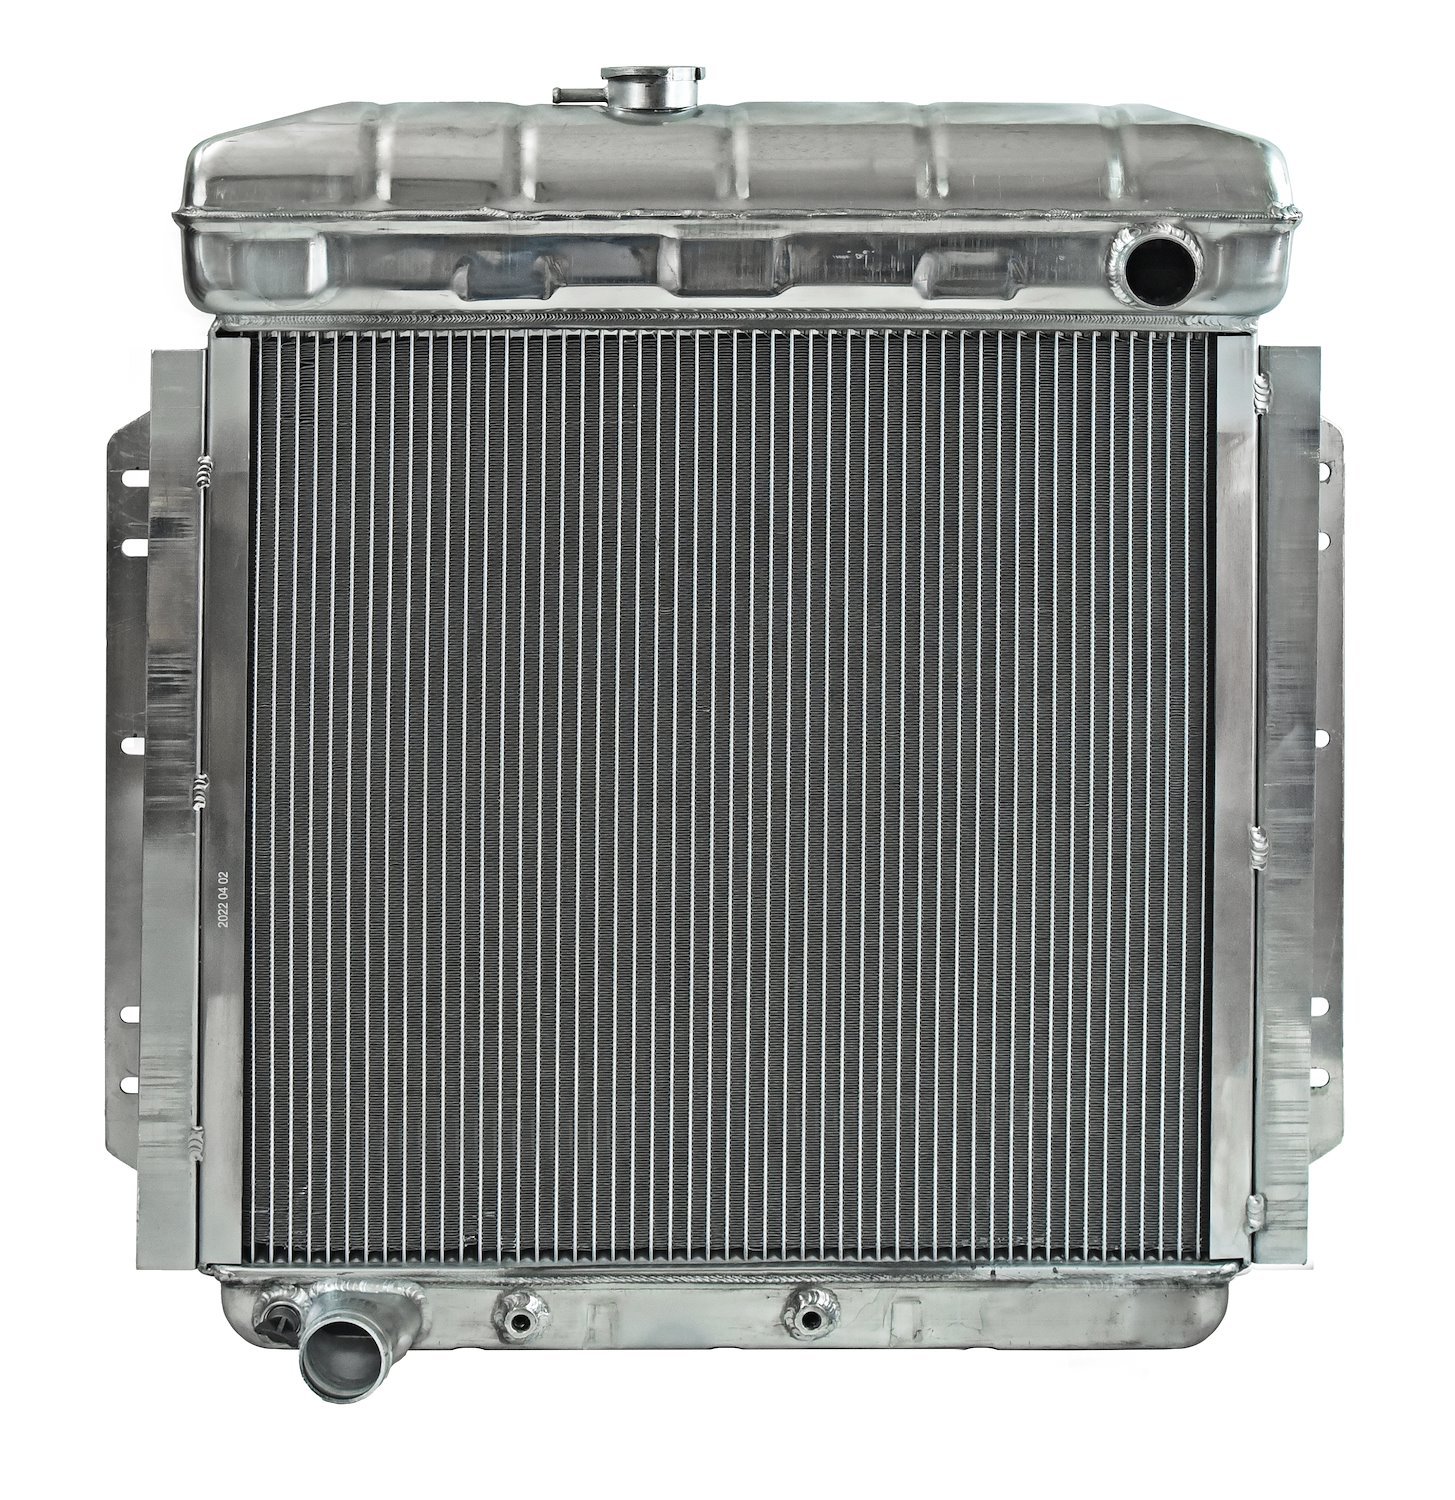 Aluminum Radiator for 1953-1956 Ford Pickup With Ford